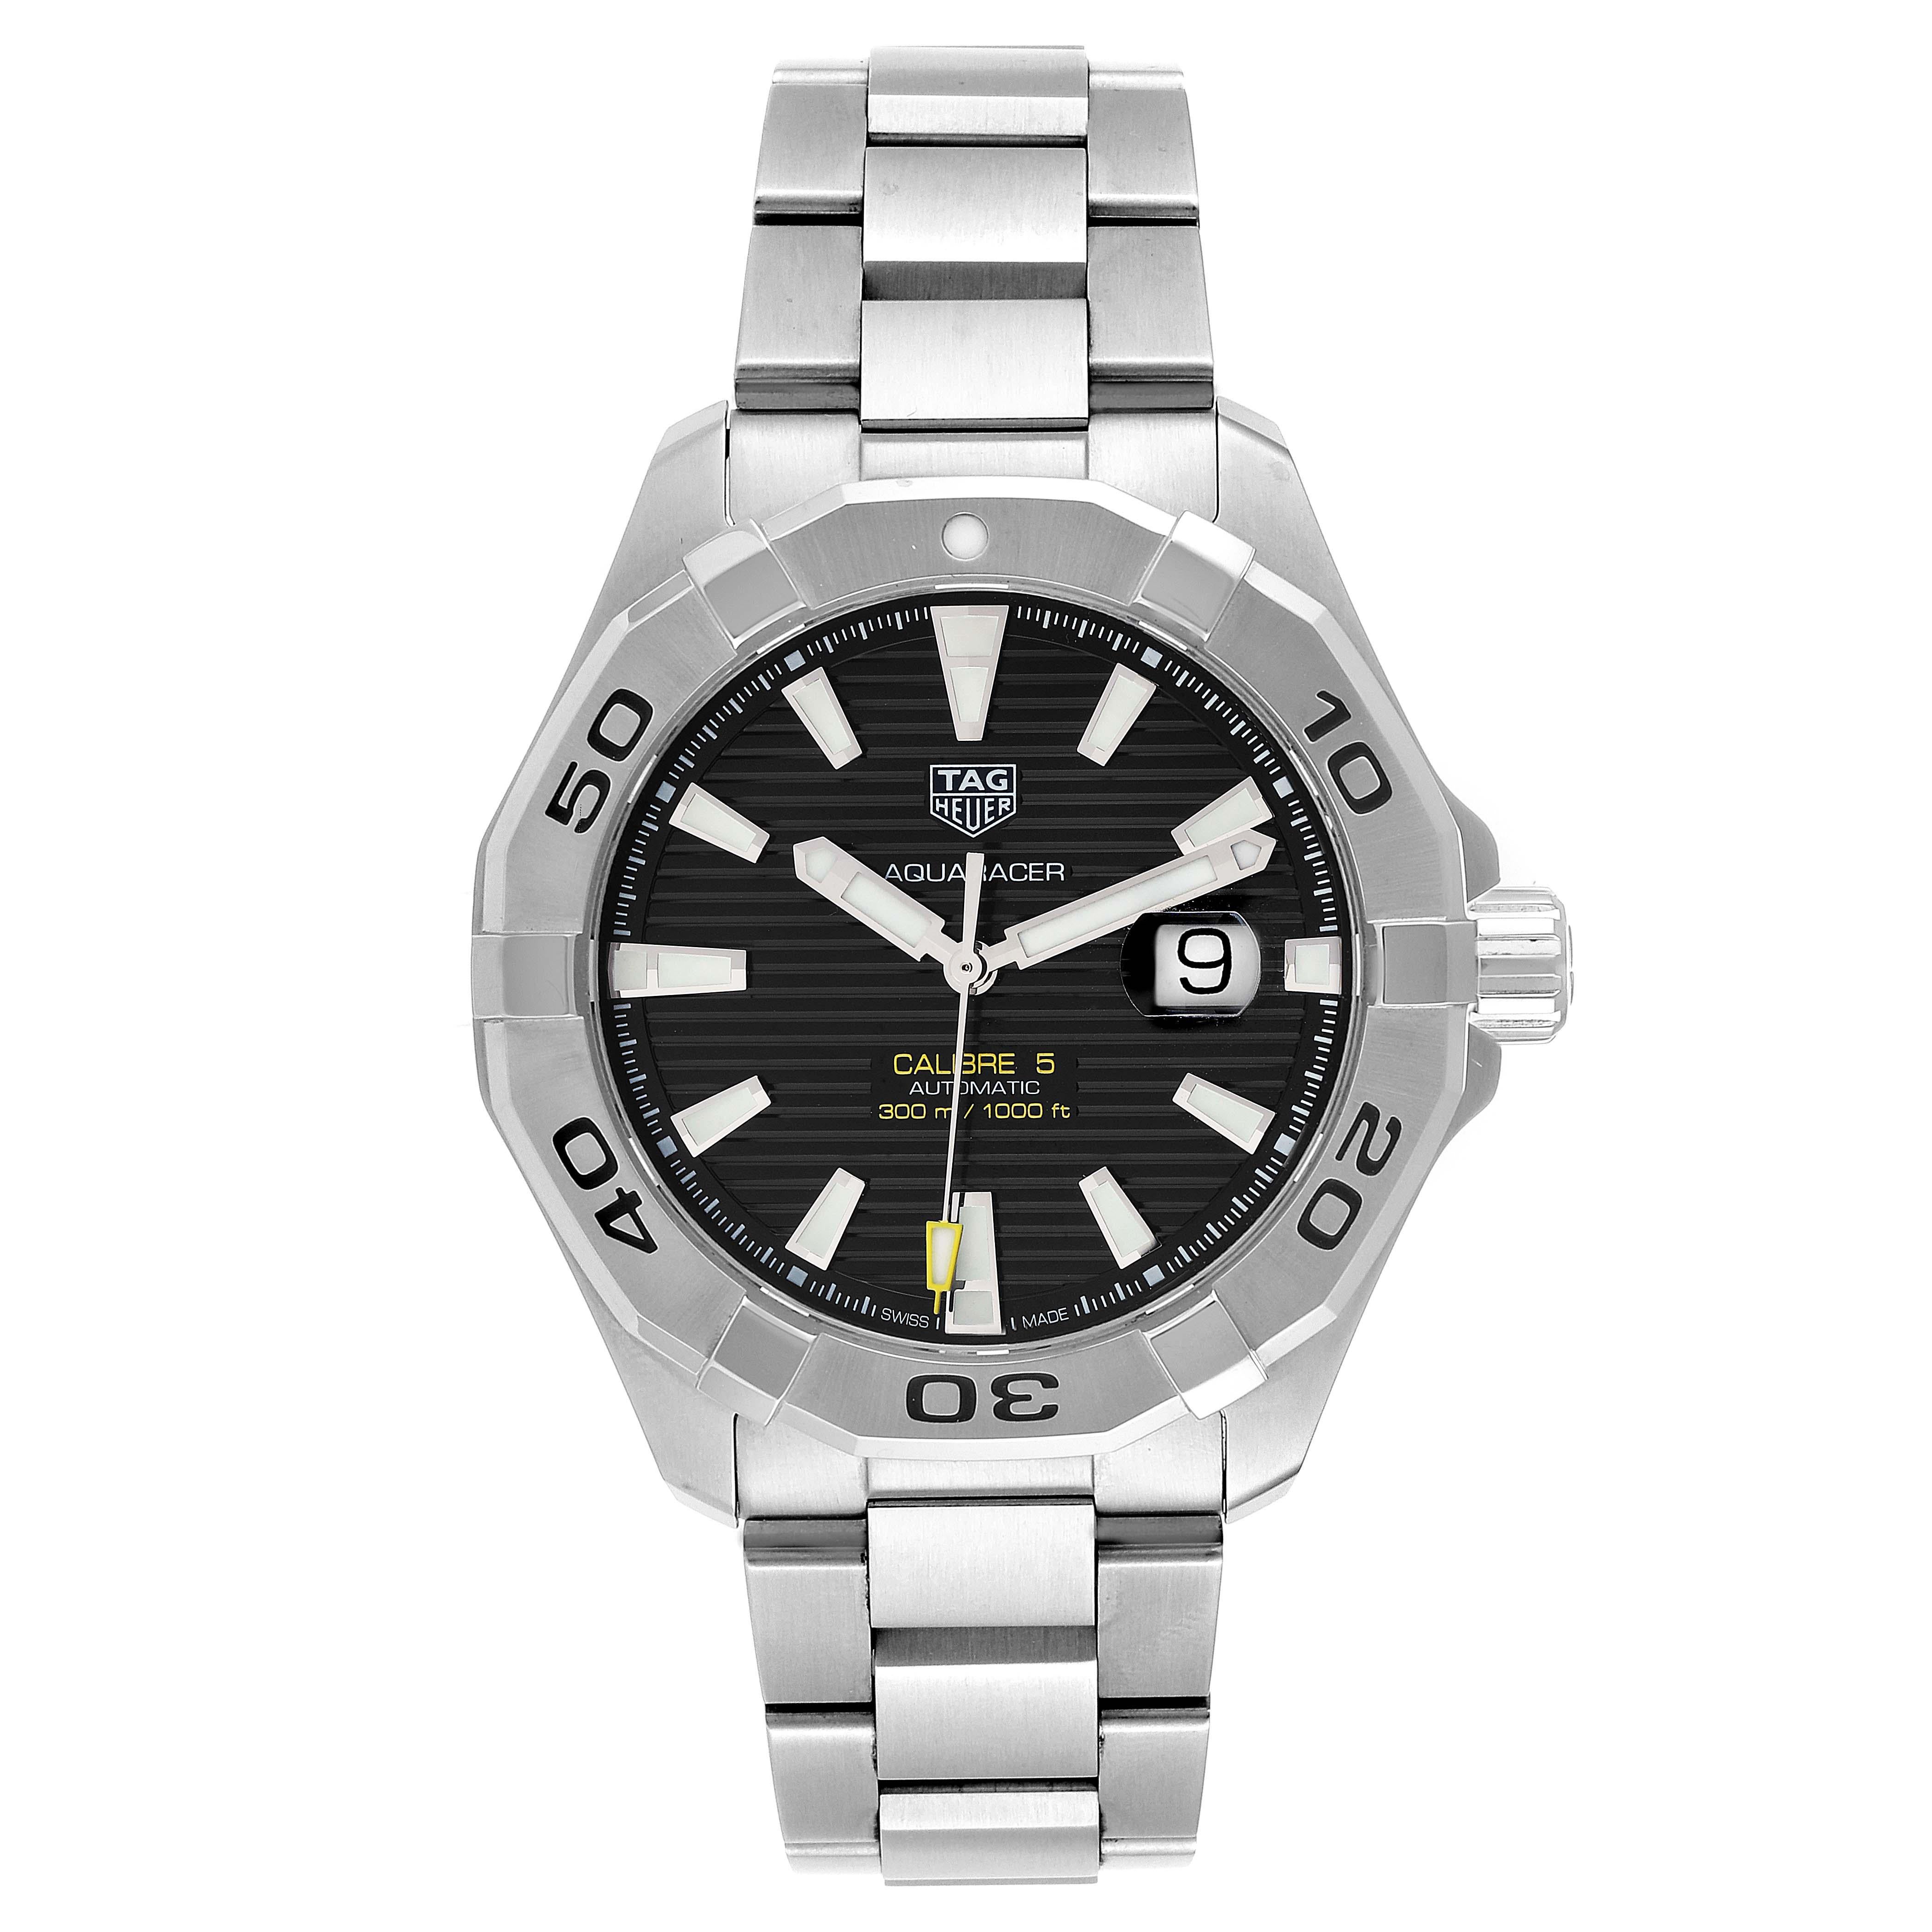 Tag Heuer Aquaracer Black Dial Steel Mens Watch WAY2010 Box Card. Automatic self-winding movement. Stainless steel case 43.0 mm in diameter. Stainless steel unidirectional rotating bezel. Scratch resistant sapphire crystal. Black dial with luminous